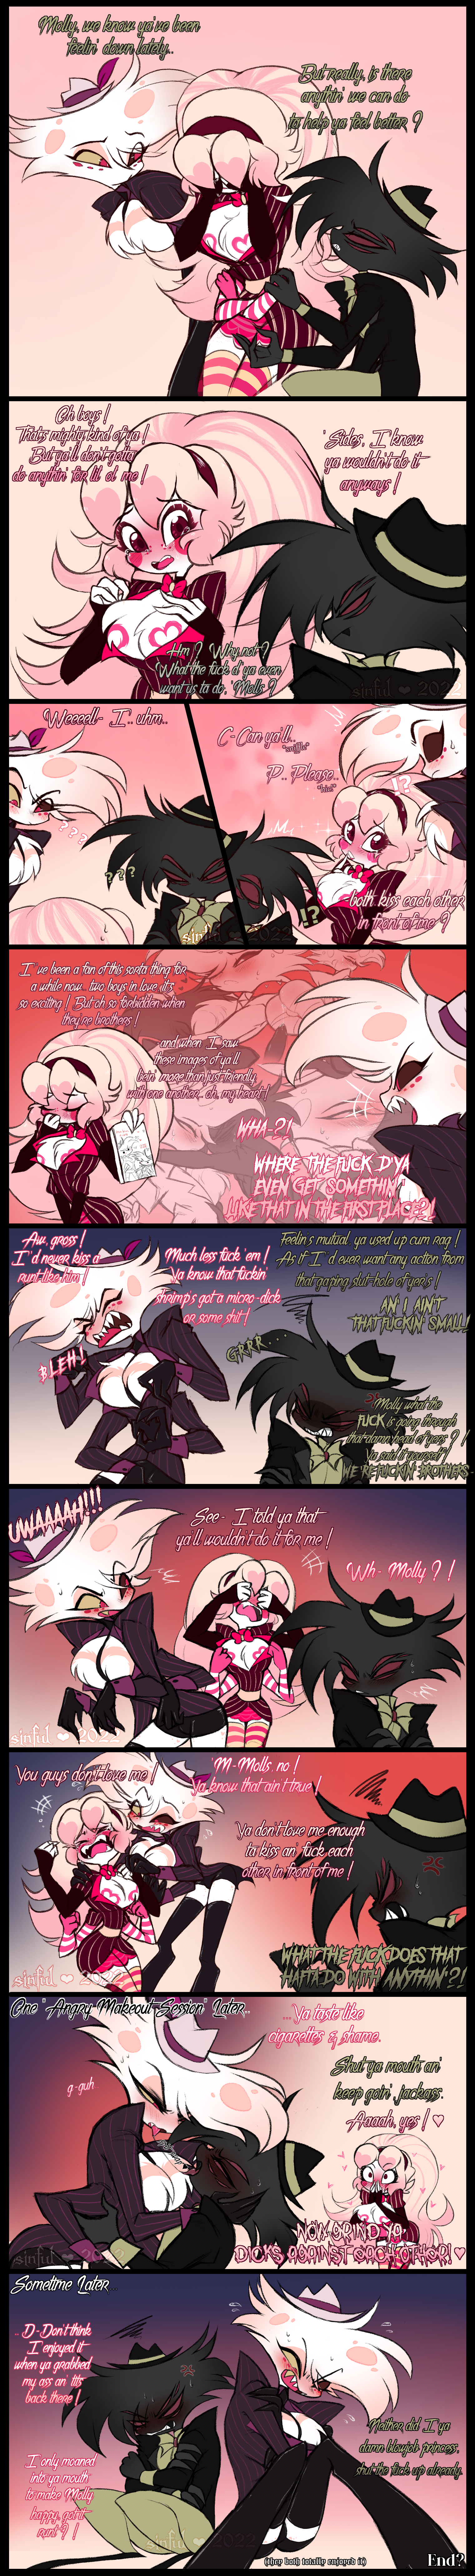 Sinful's Spidercest Collection - Chapter 6 - Anonymous - Hazbin